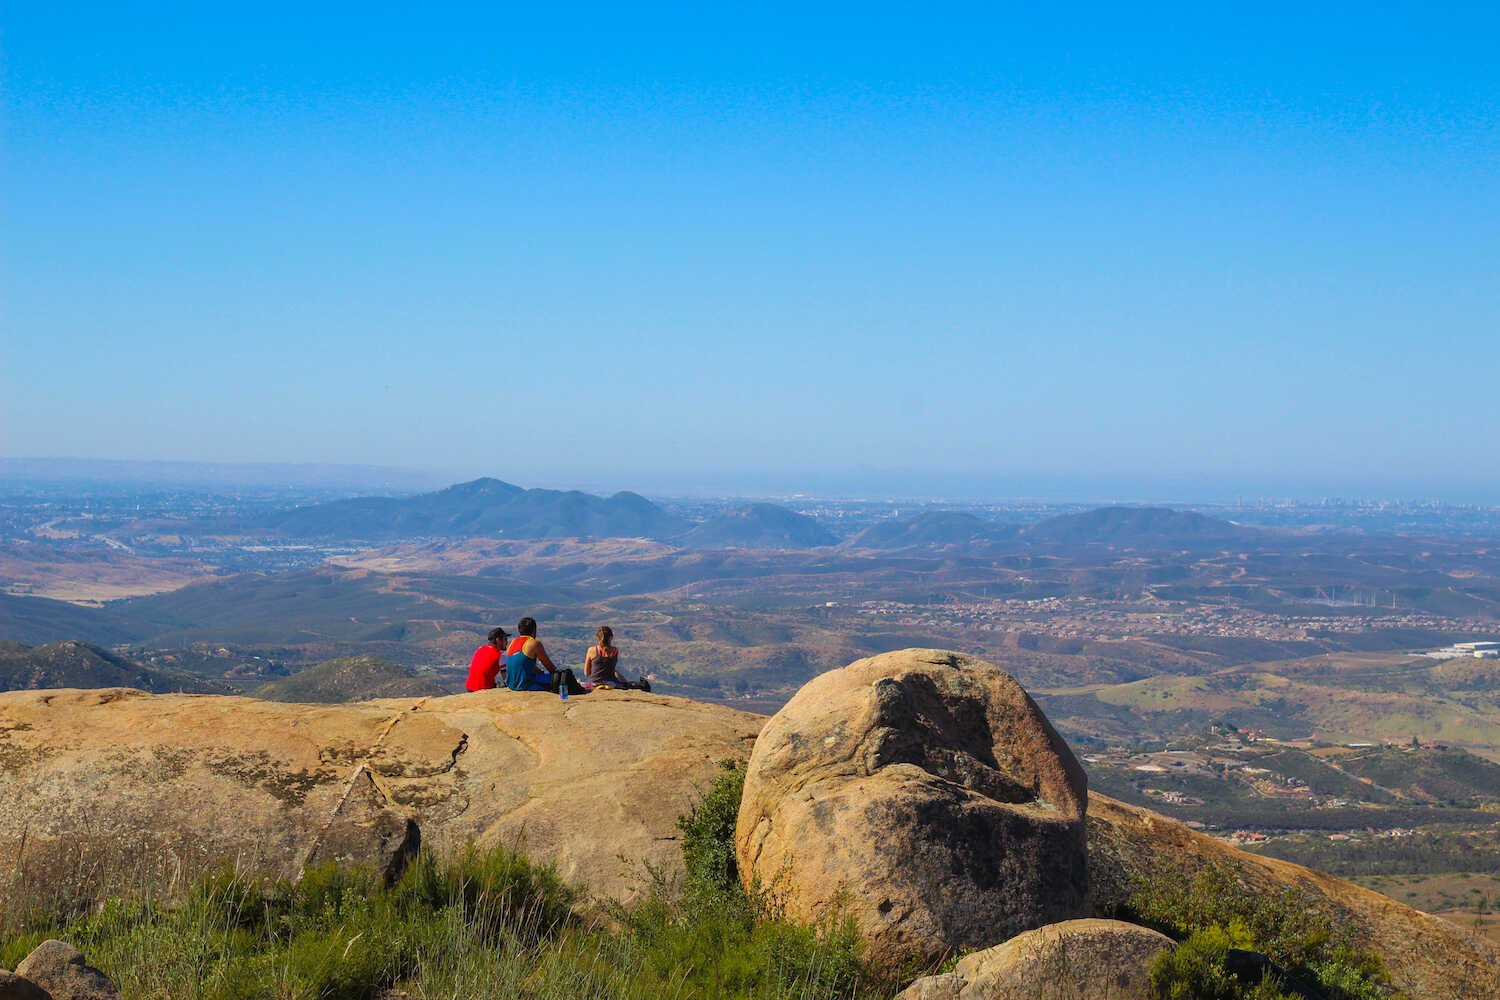 Beautiful Places in San Diego to Take Family Pictures - Views from the Mount Woodson trail up to Potato Chip Rock.